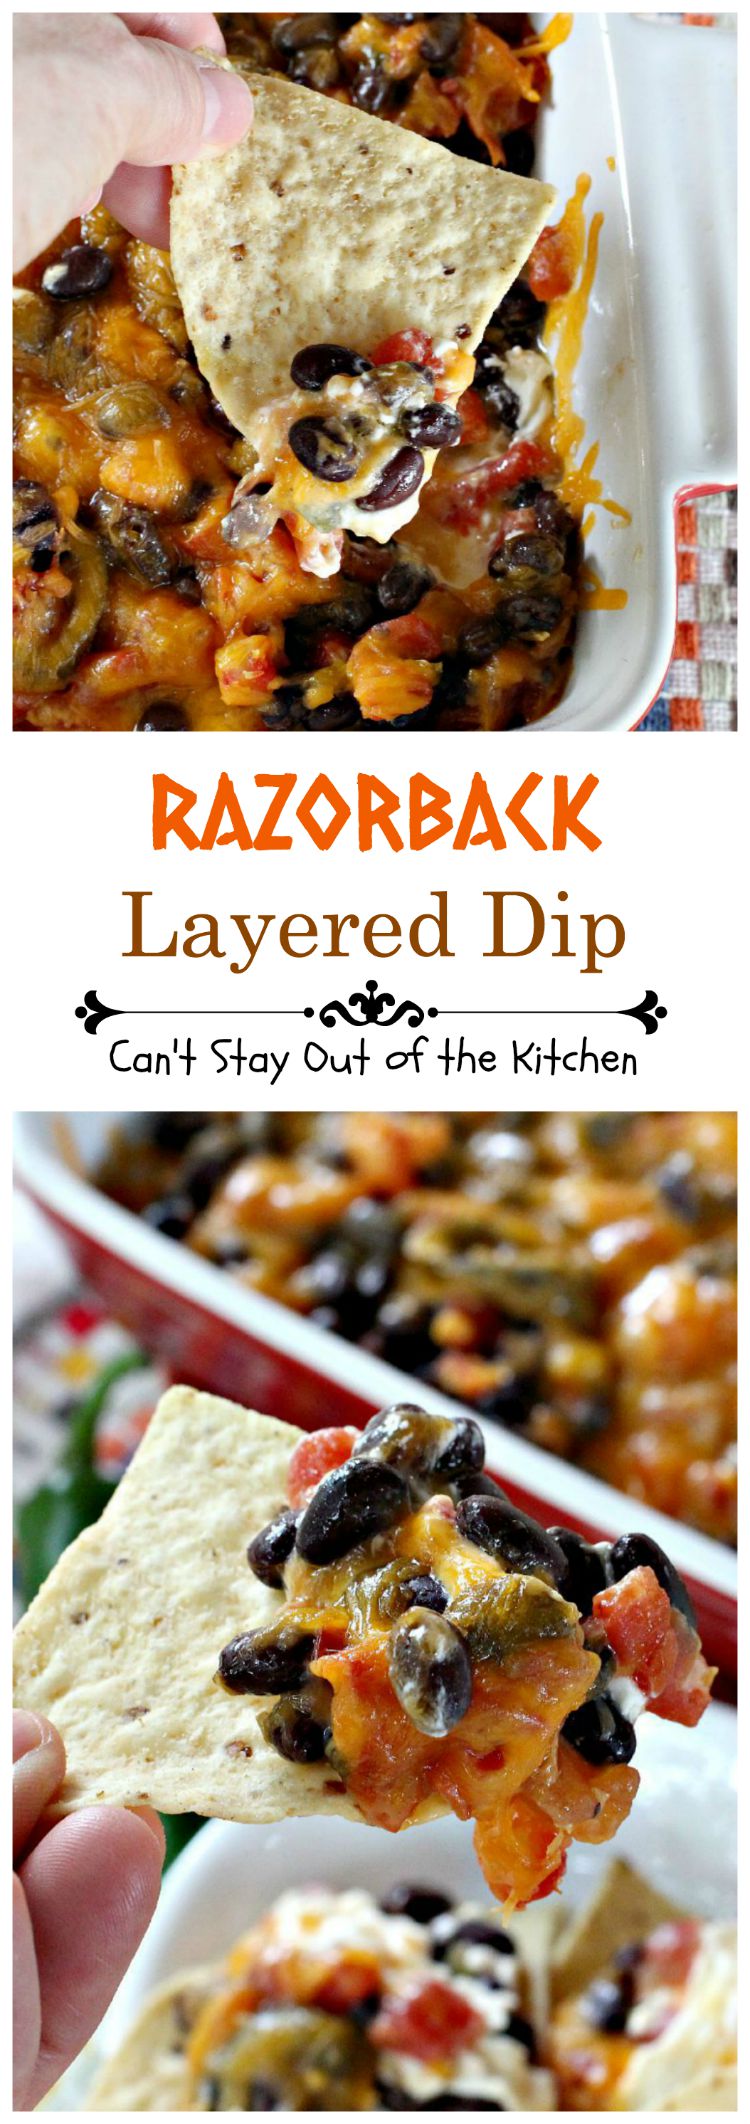 Razorback Layered Dip | Can't Stay Out of the Kitchen